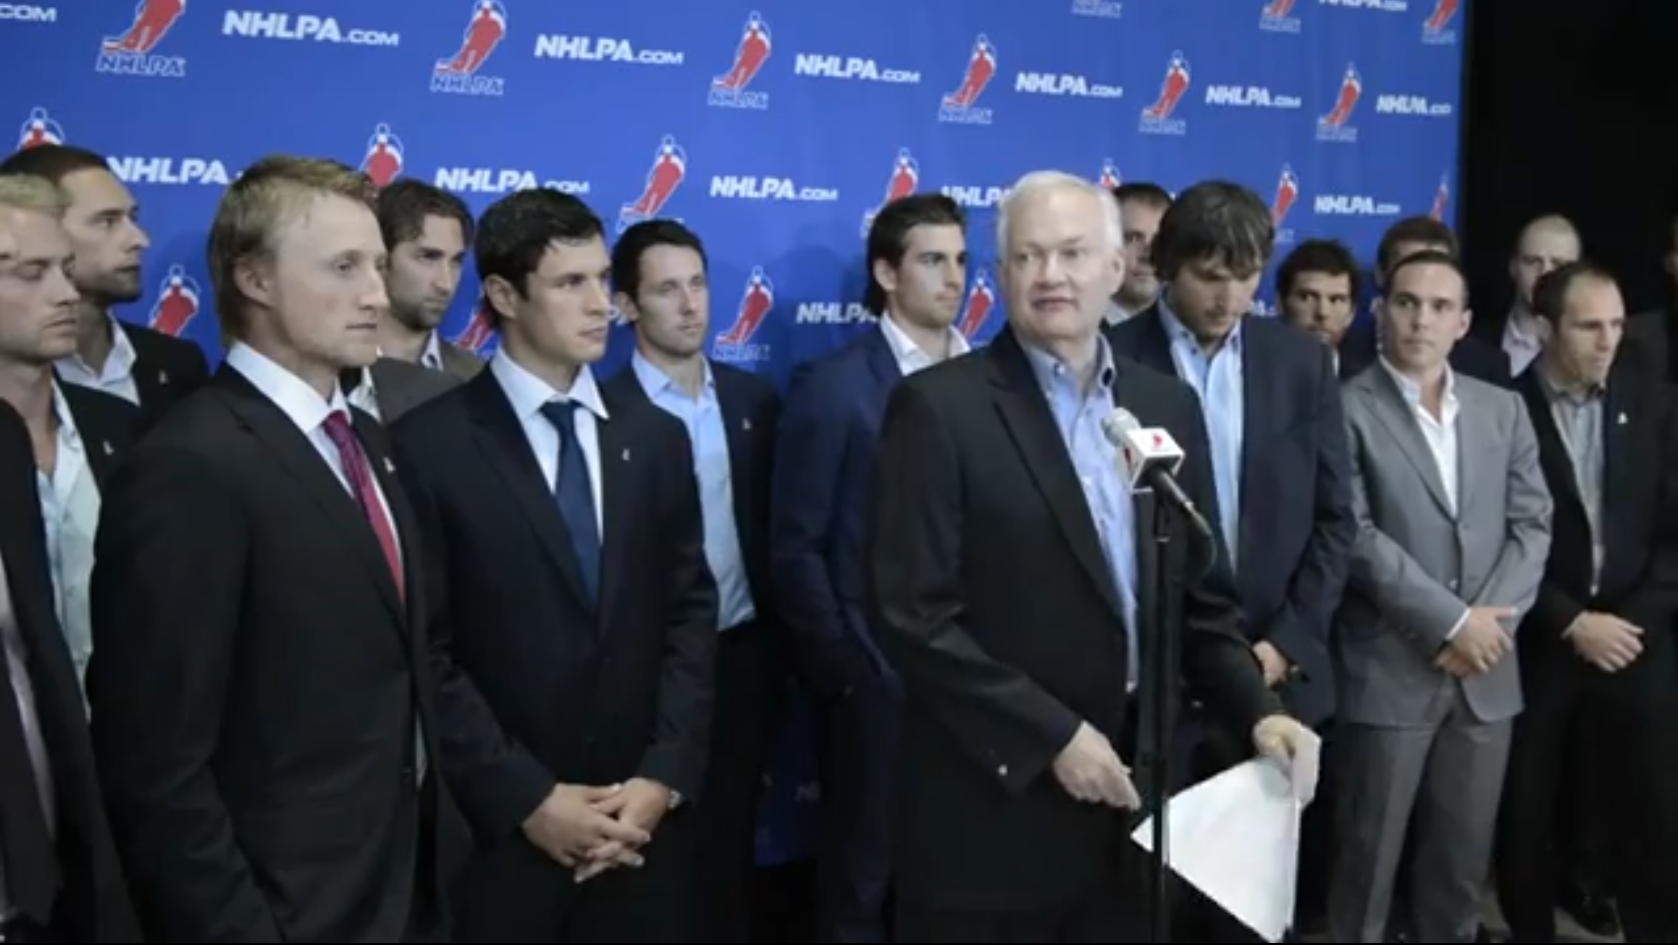 Don Fehr and players